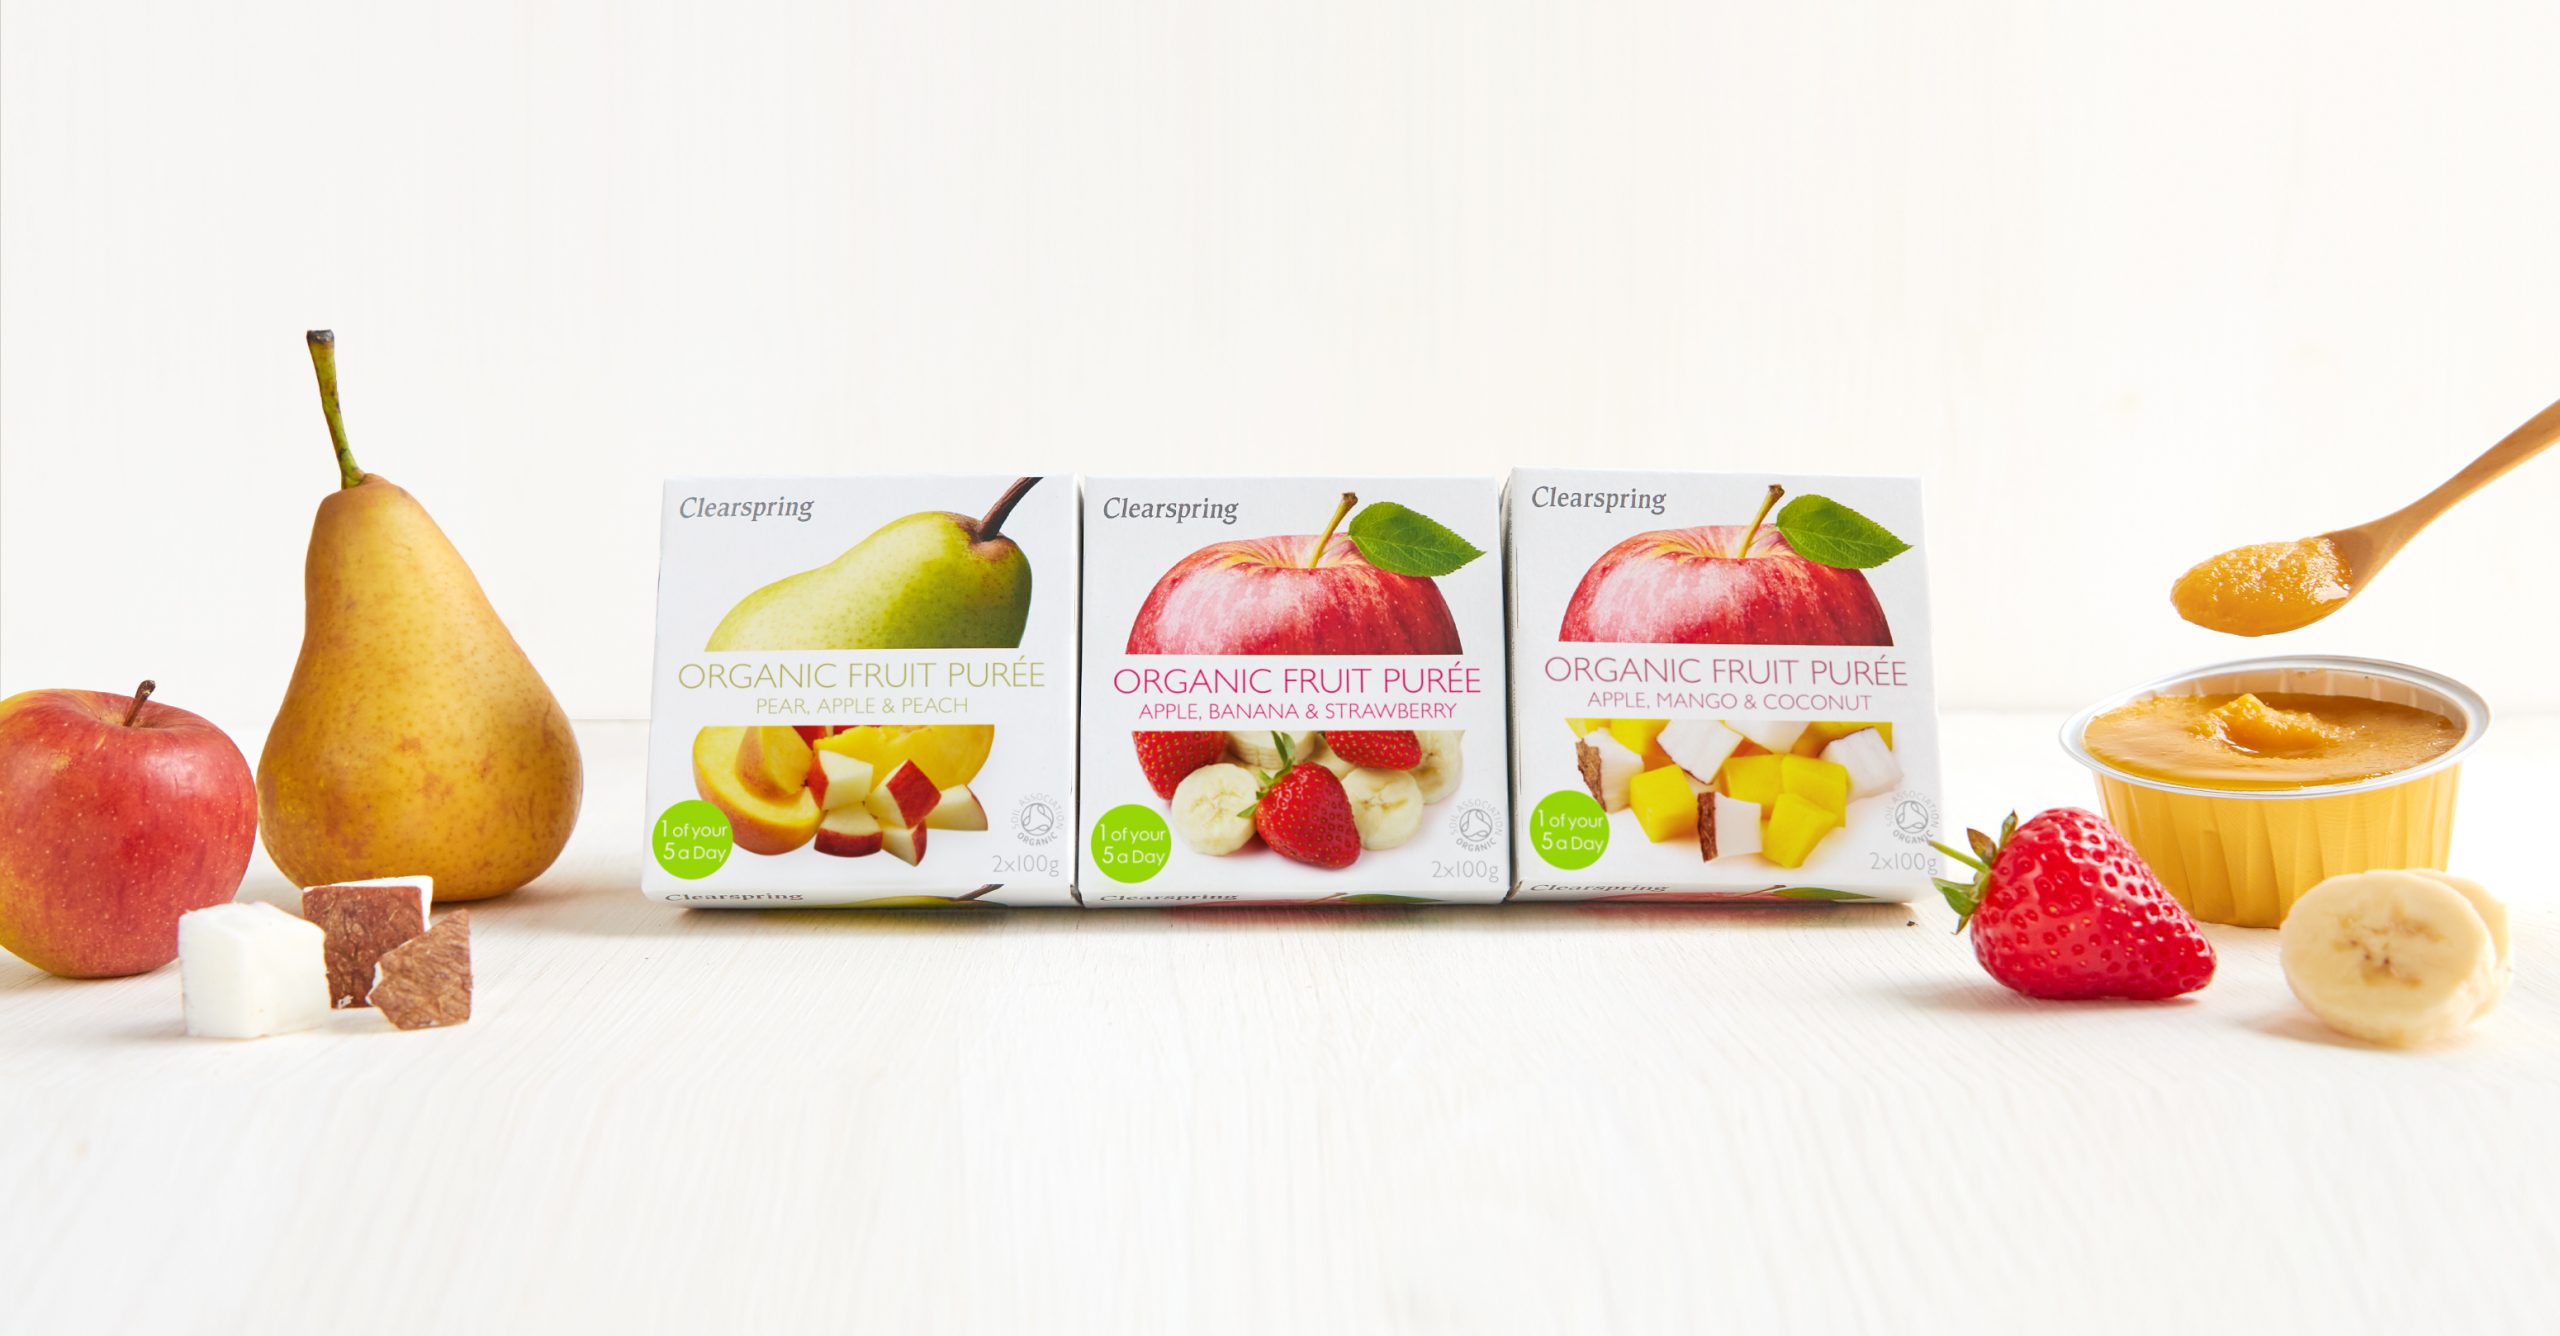 Clearspring adds flavours to Organic Purée range